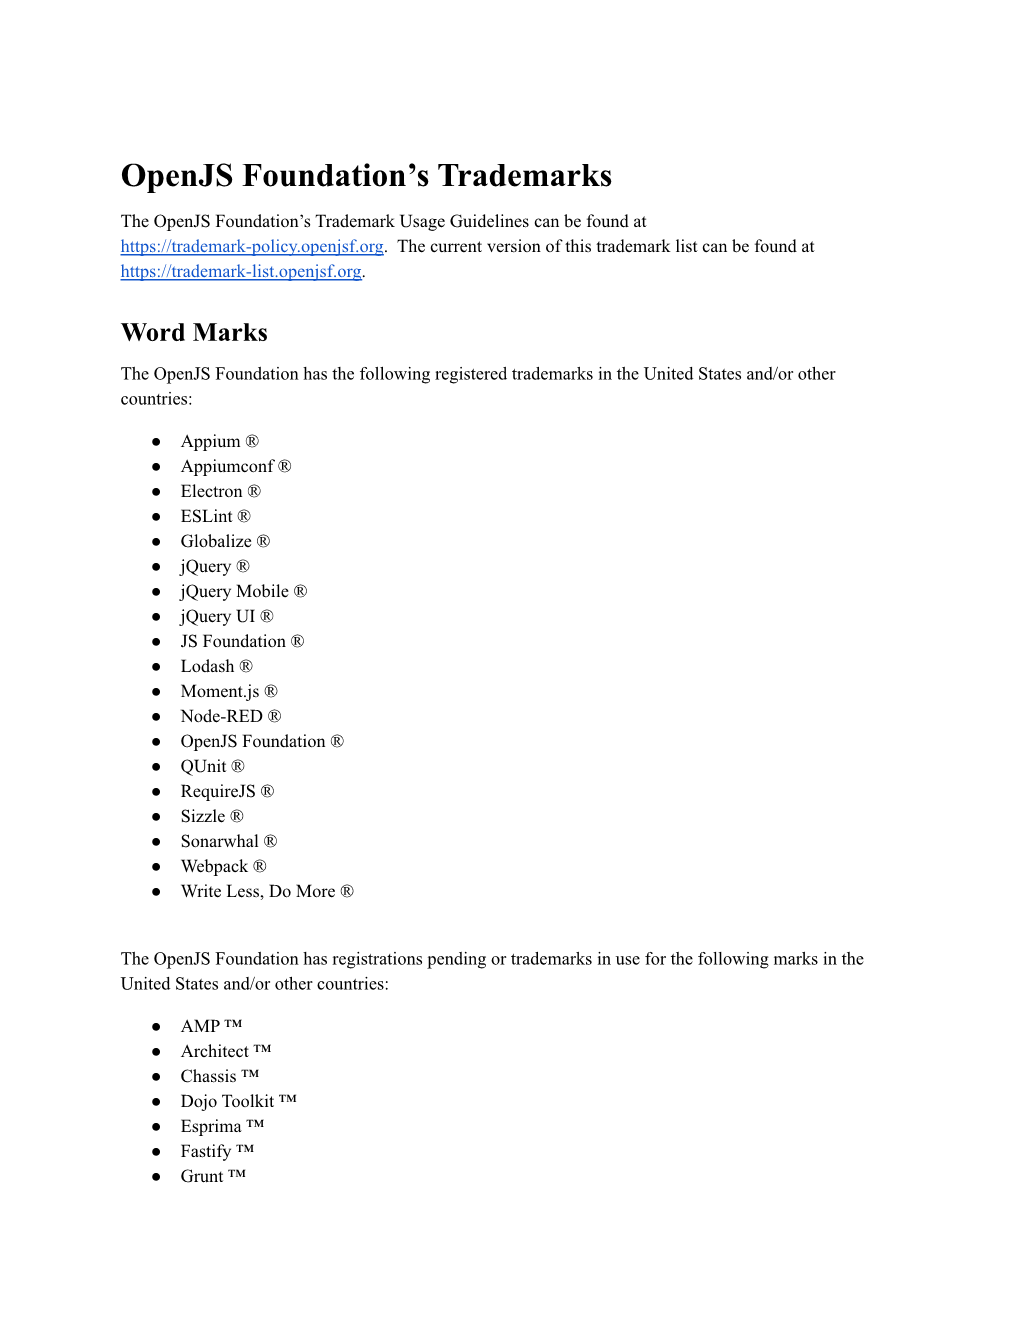 Trademark List Can Be Found At